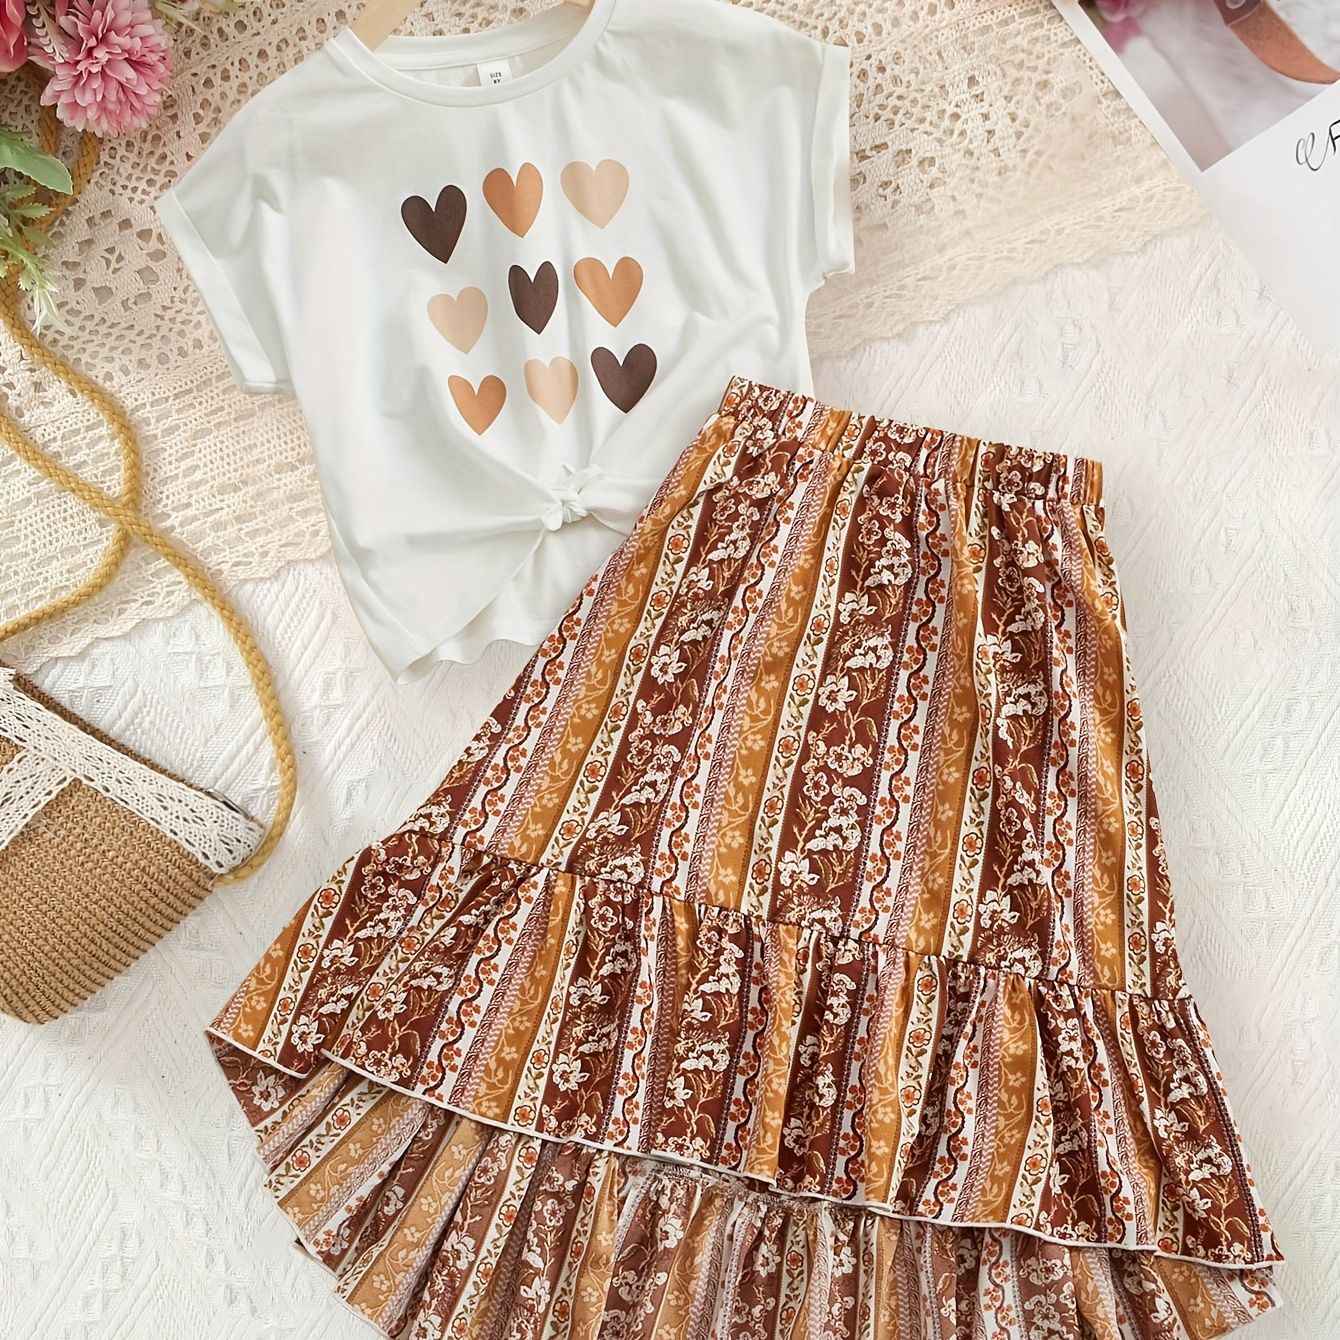 

2pcs, Brown Hearts Print Batwing Sleeve T-shirt + High-low Midi Skirt Girl's Summer Set - Perfect For Casual Outings, Gift Idea